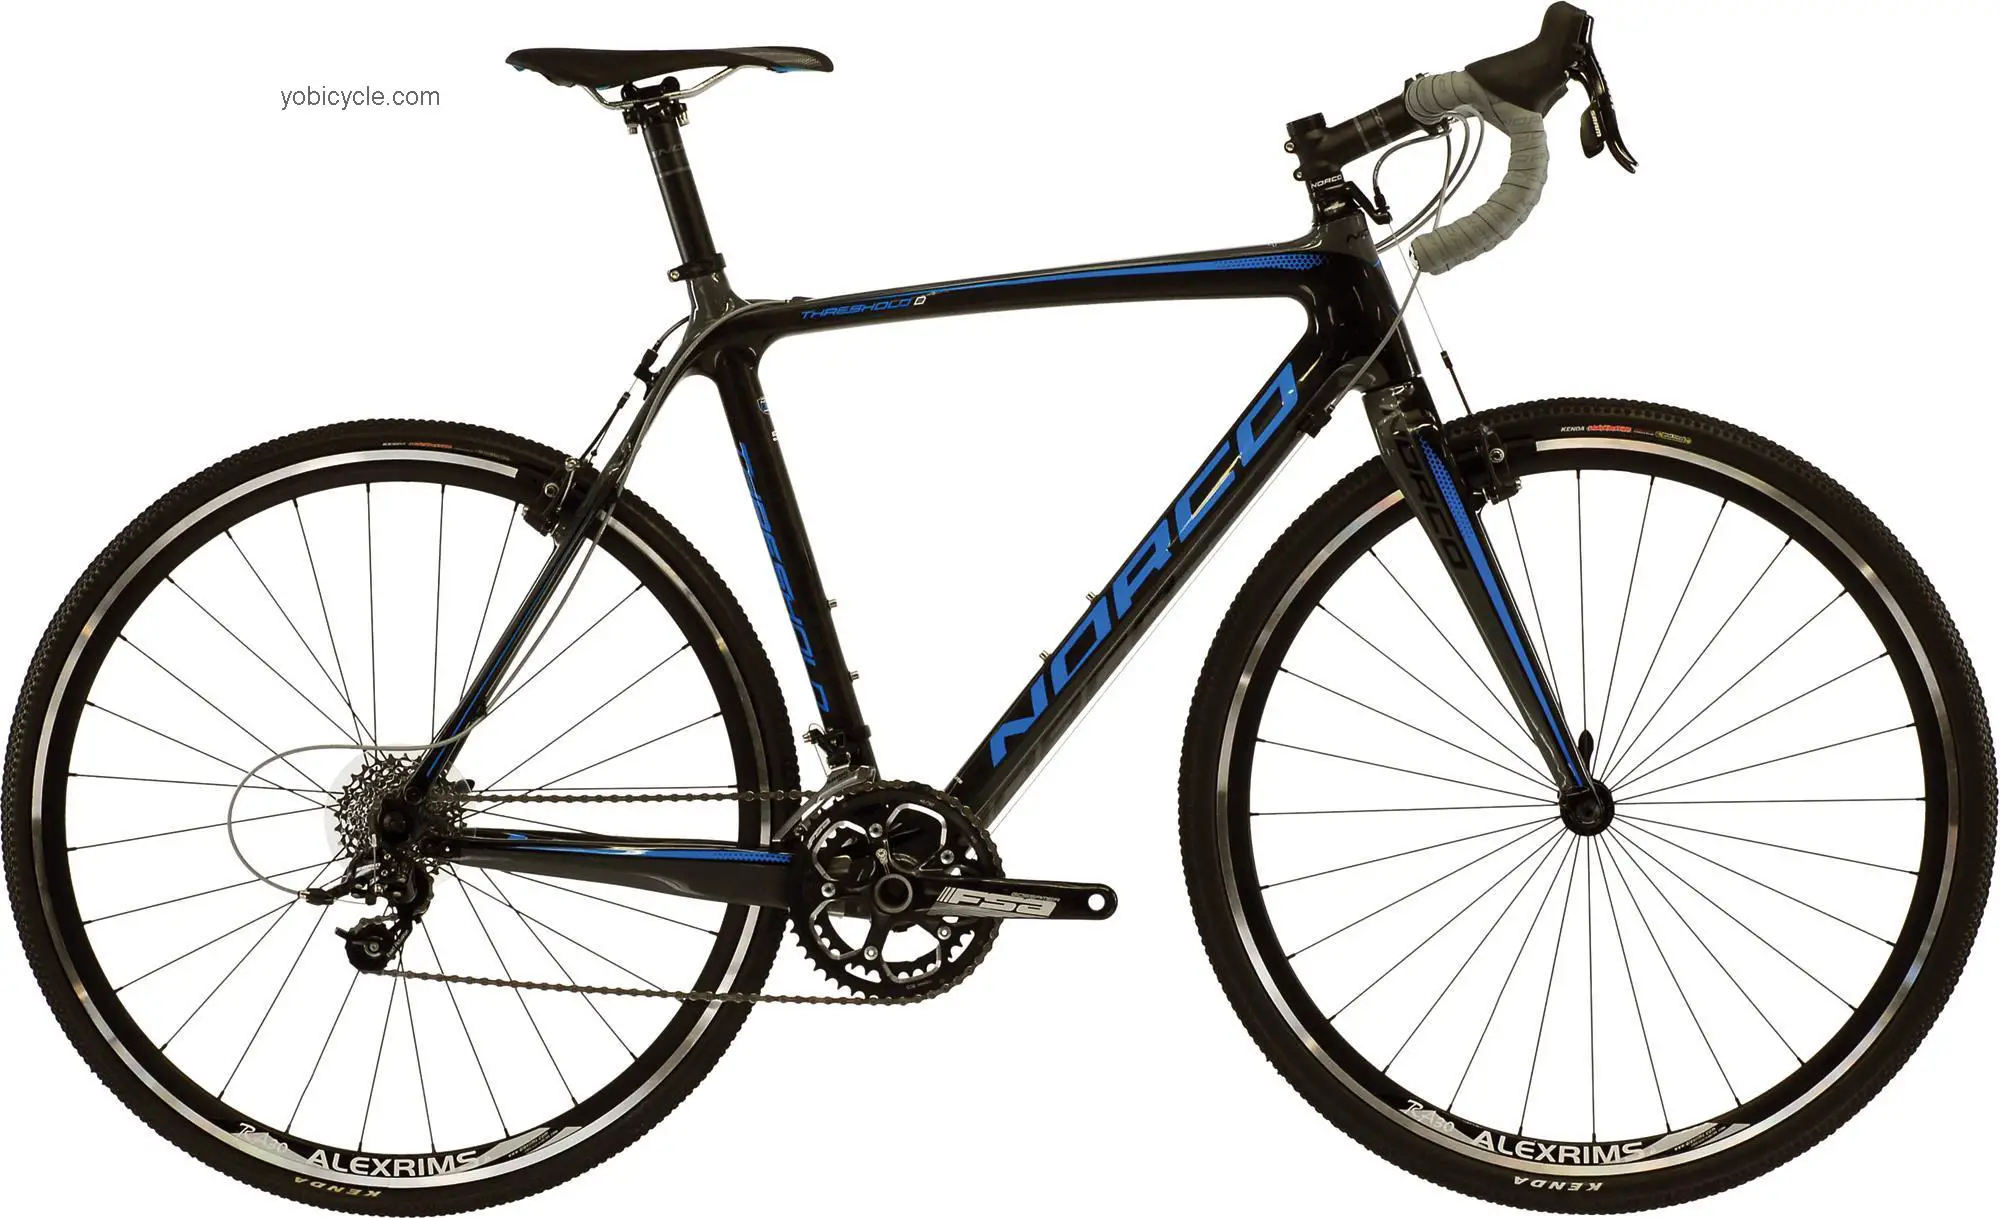 Norco Threshold C2 2013 comparison online with competitors